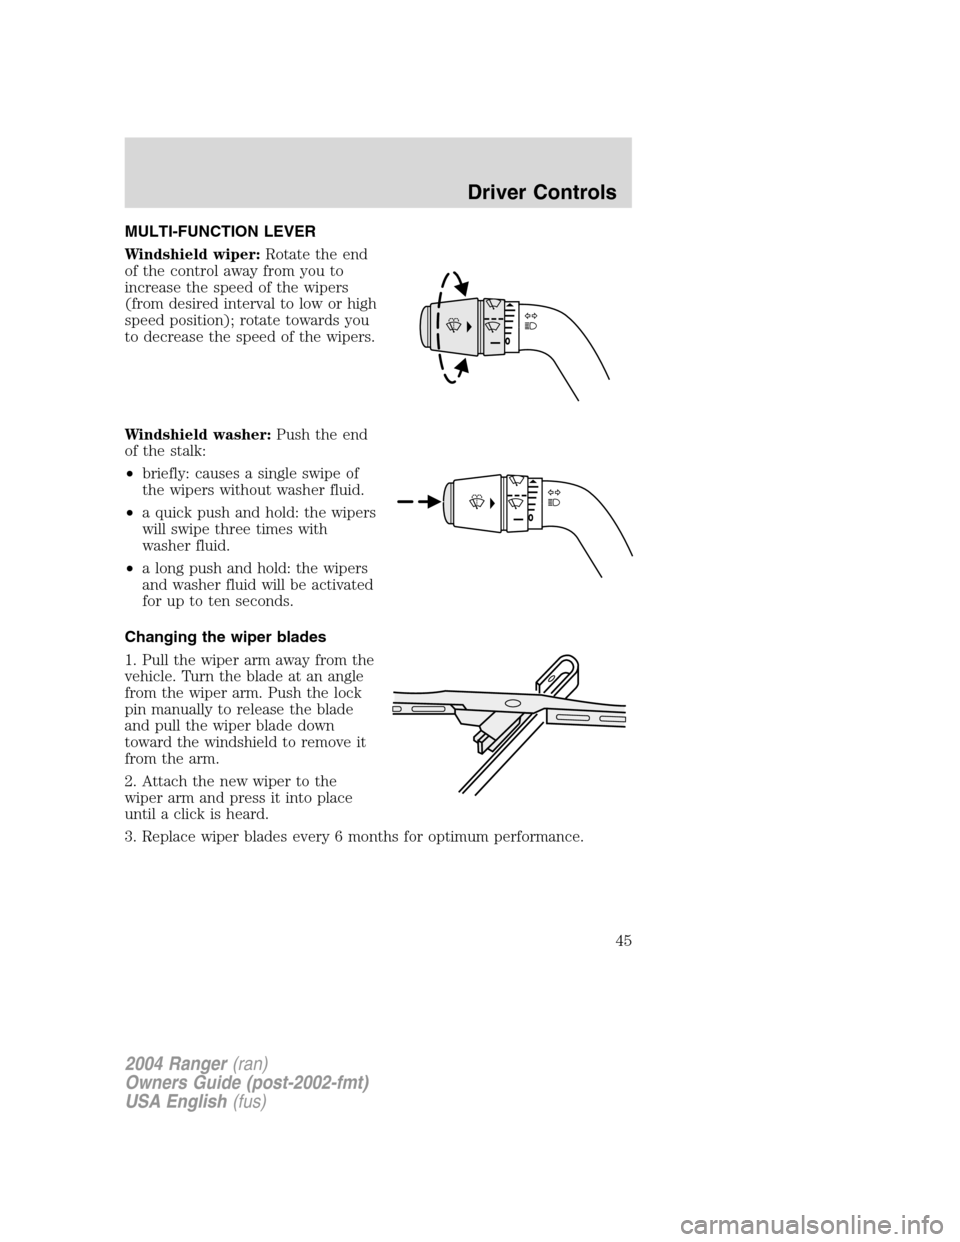 FORD RANGER 2004 2.G Service Manual MULTI-FUNCTION LEVER
Windshield wiper:Rotate the end
of the control away from you to
increase the speed of the wipers
(from desired interval to low or high
speed position); rotate towards you
to decre